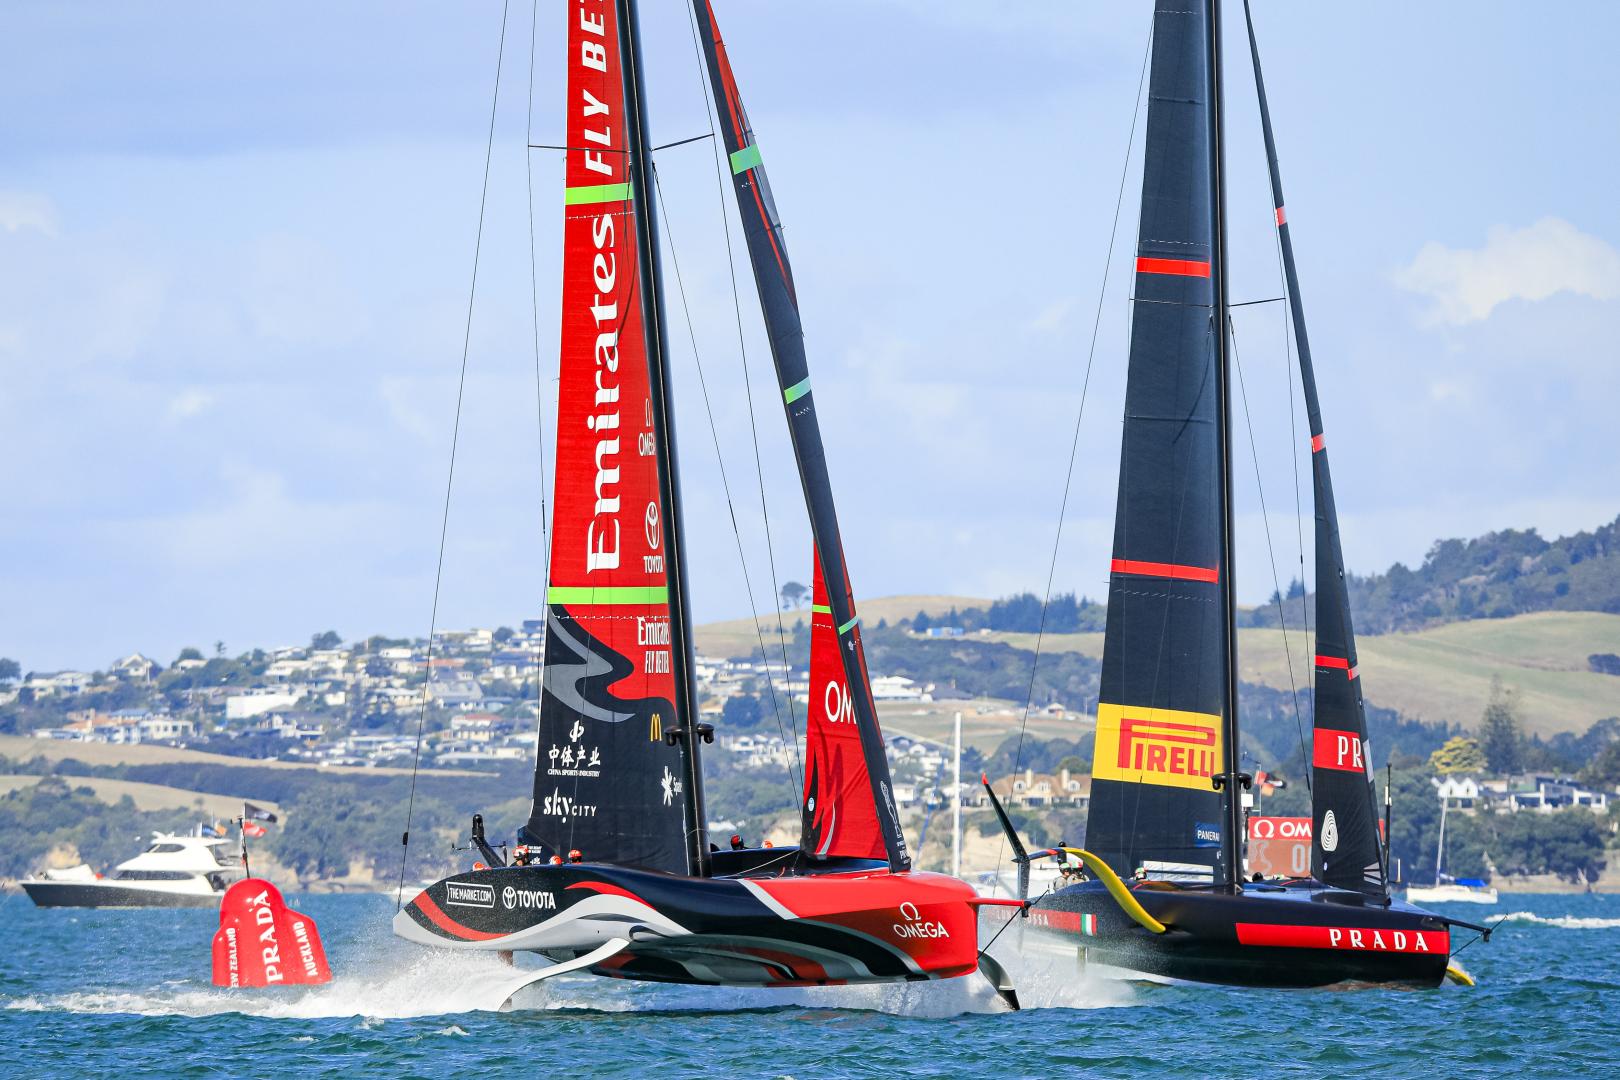 36th America’s Cup: the mental game becomes more intense